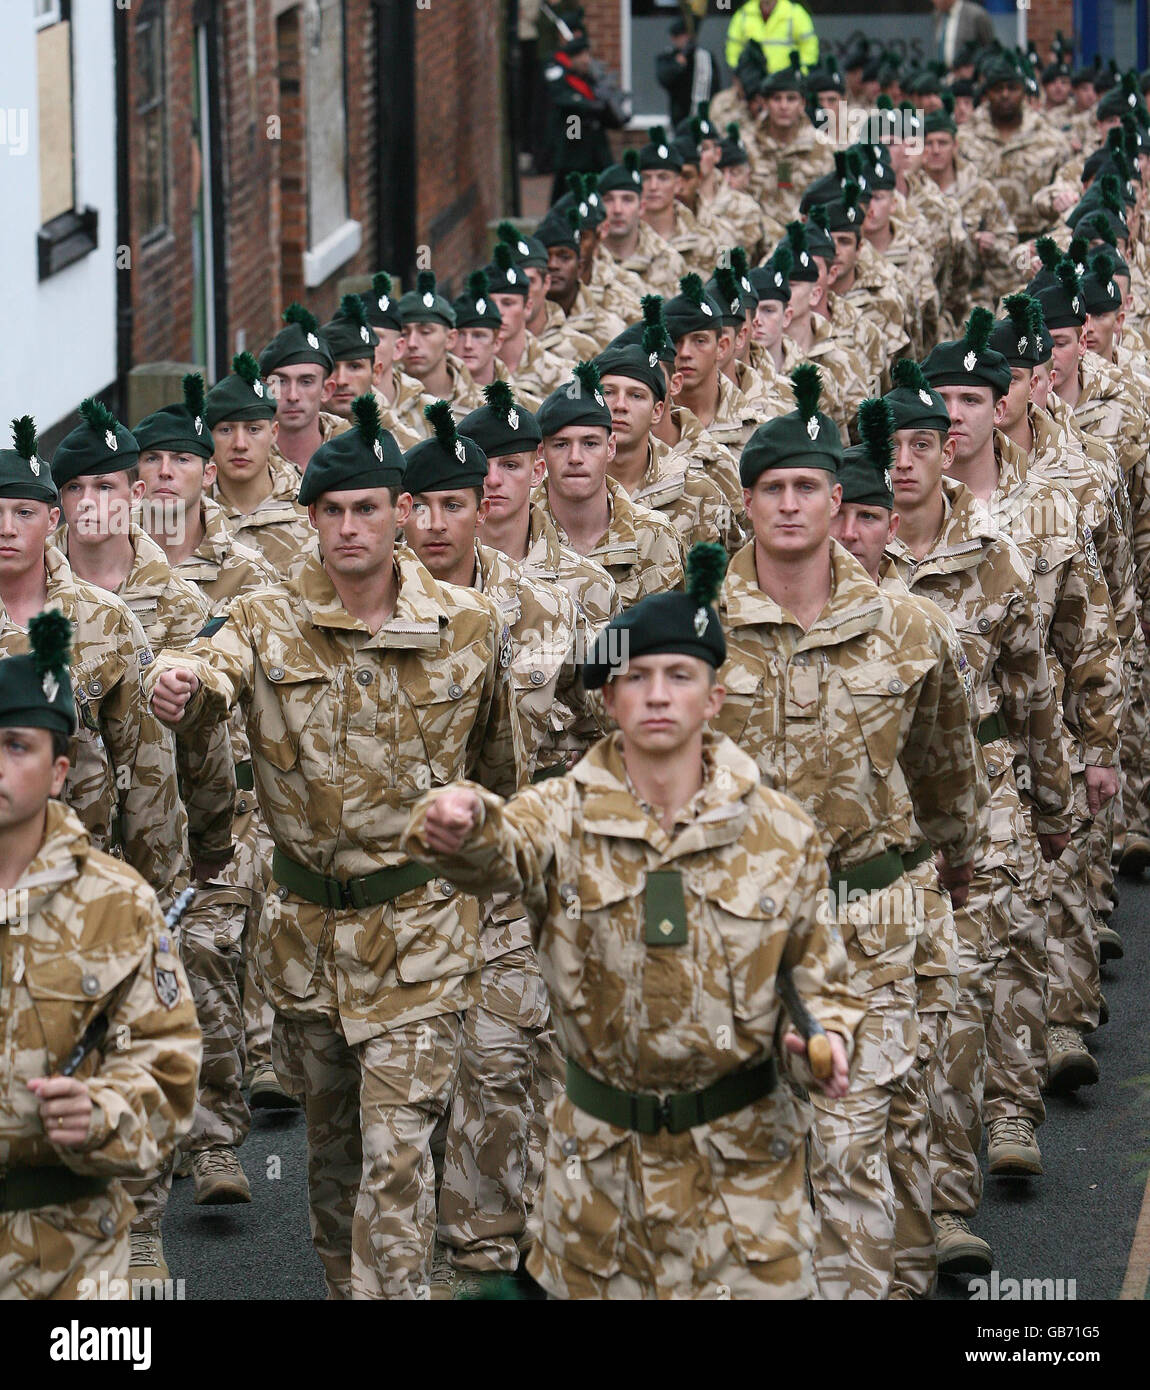 Members of the Royal Irish Regiment parade through Market Drayton, Shropshire, after returning home from Afghanistan. Stock Photo